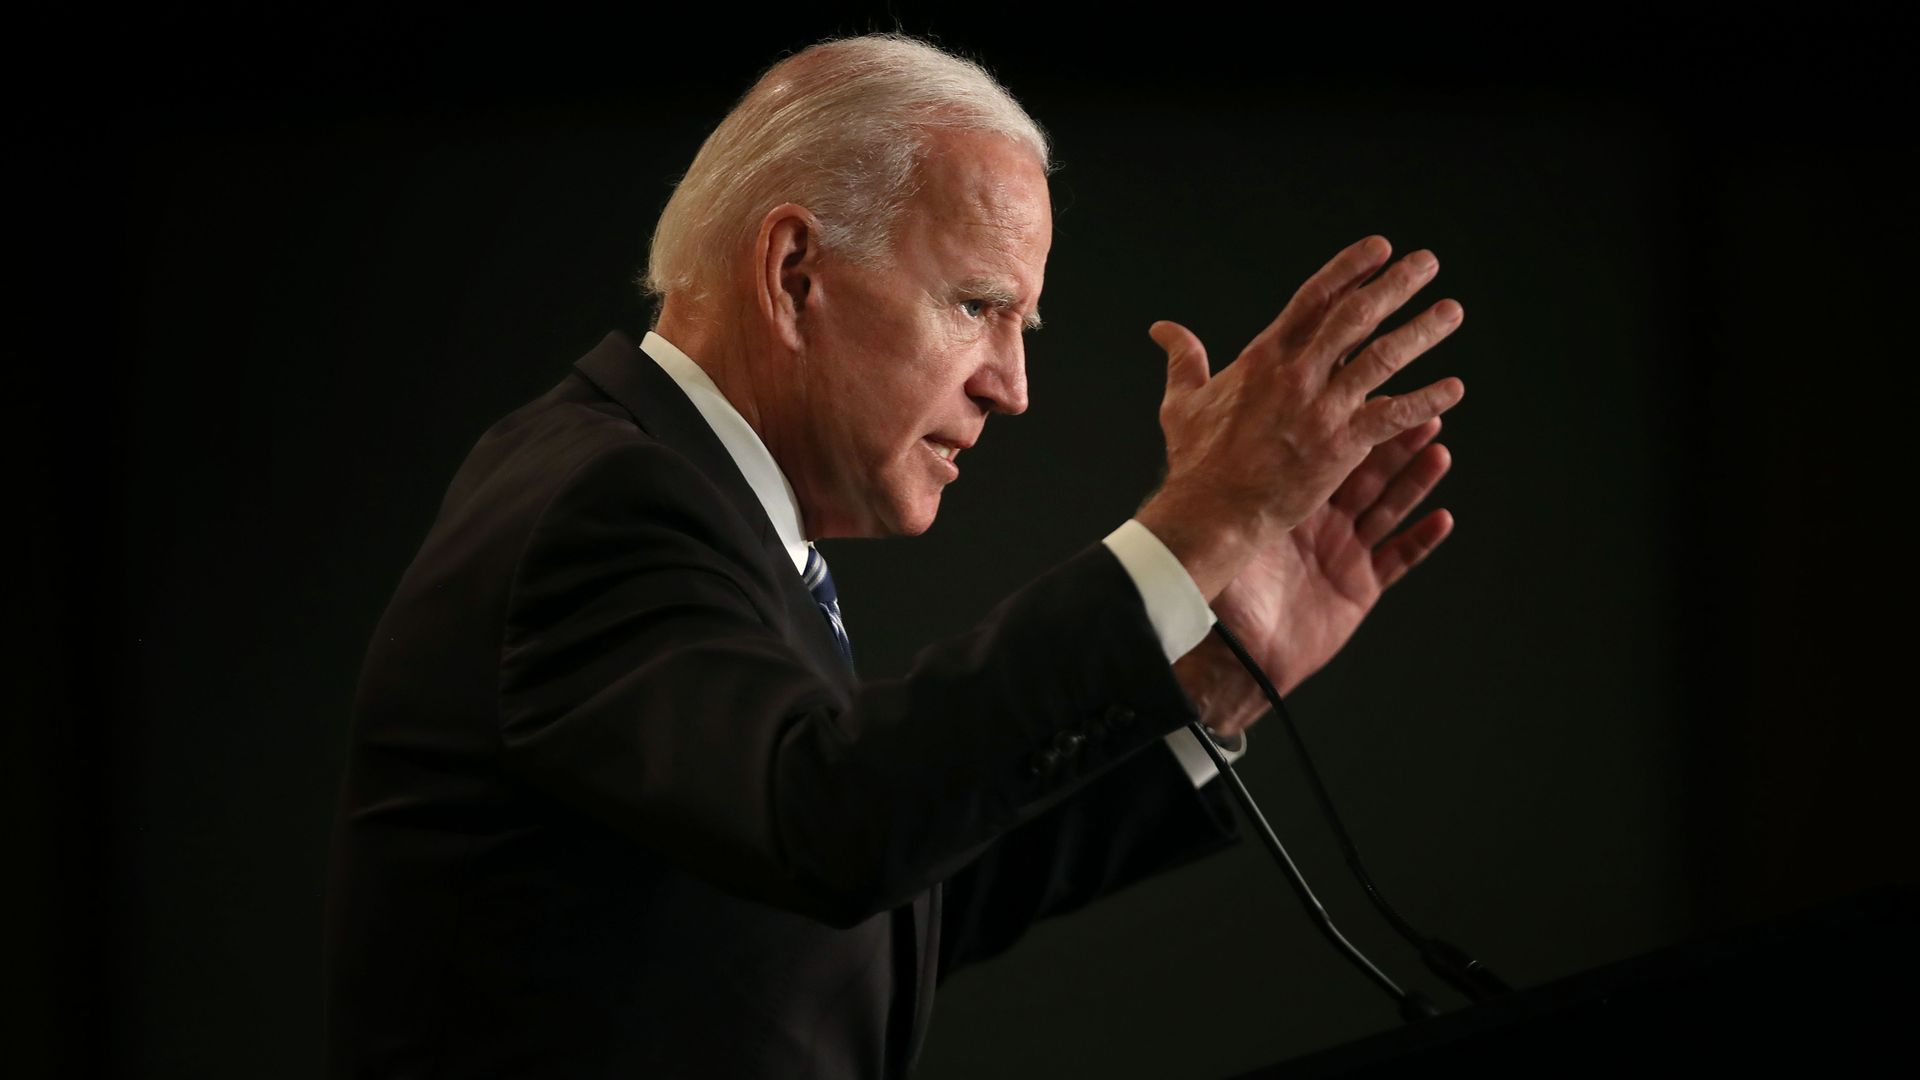 In this image, Biden stands with his hands outstretched. 